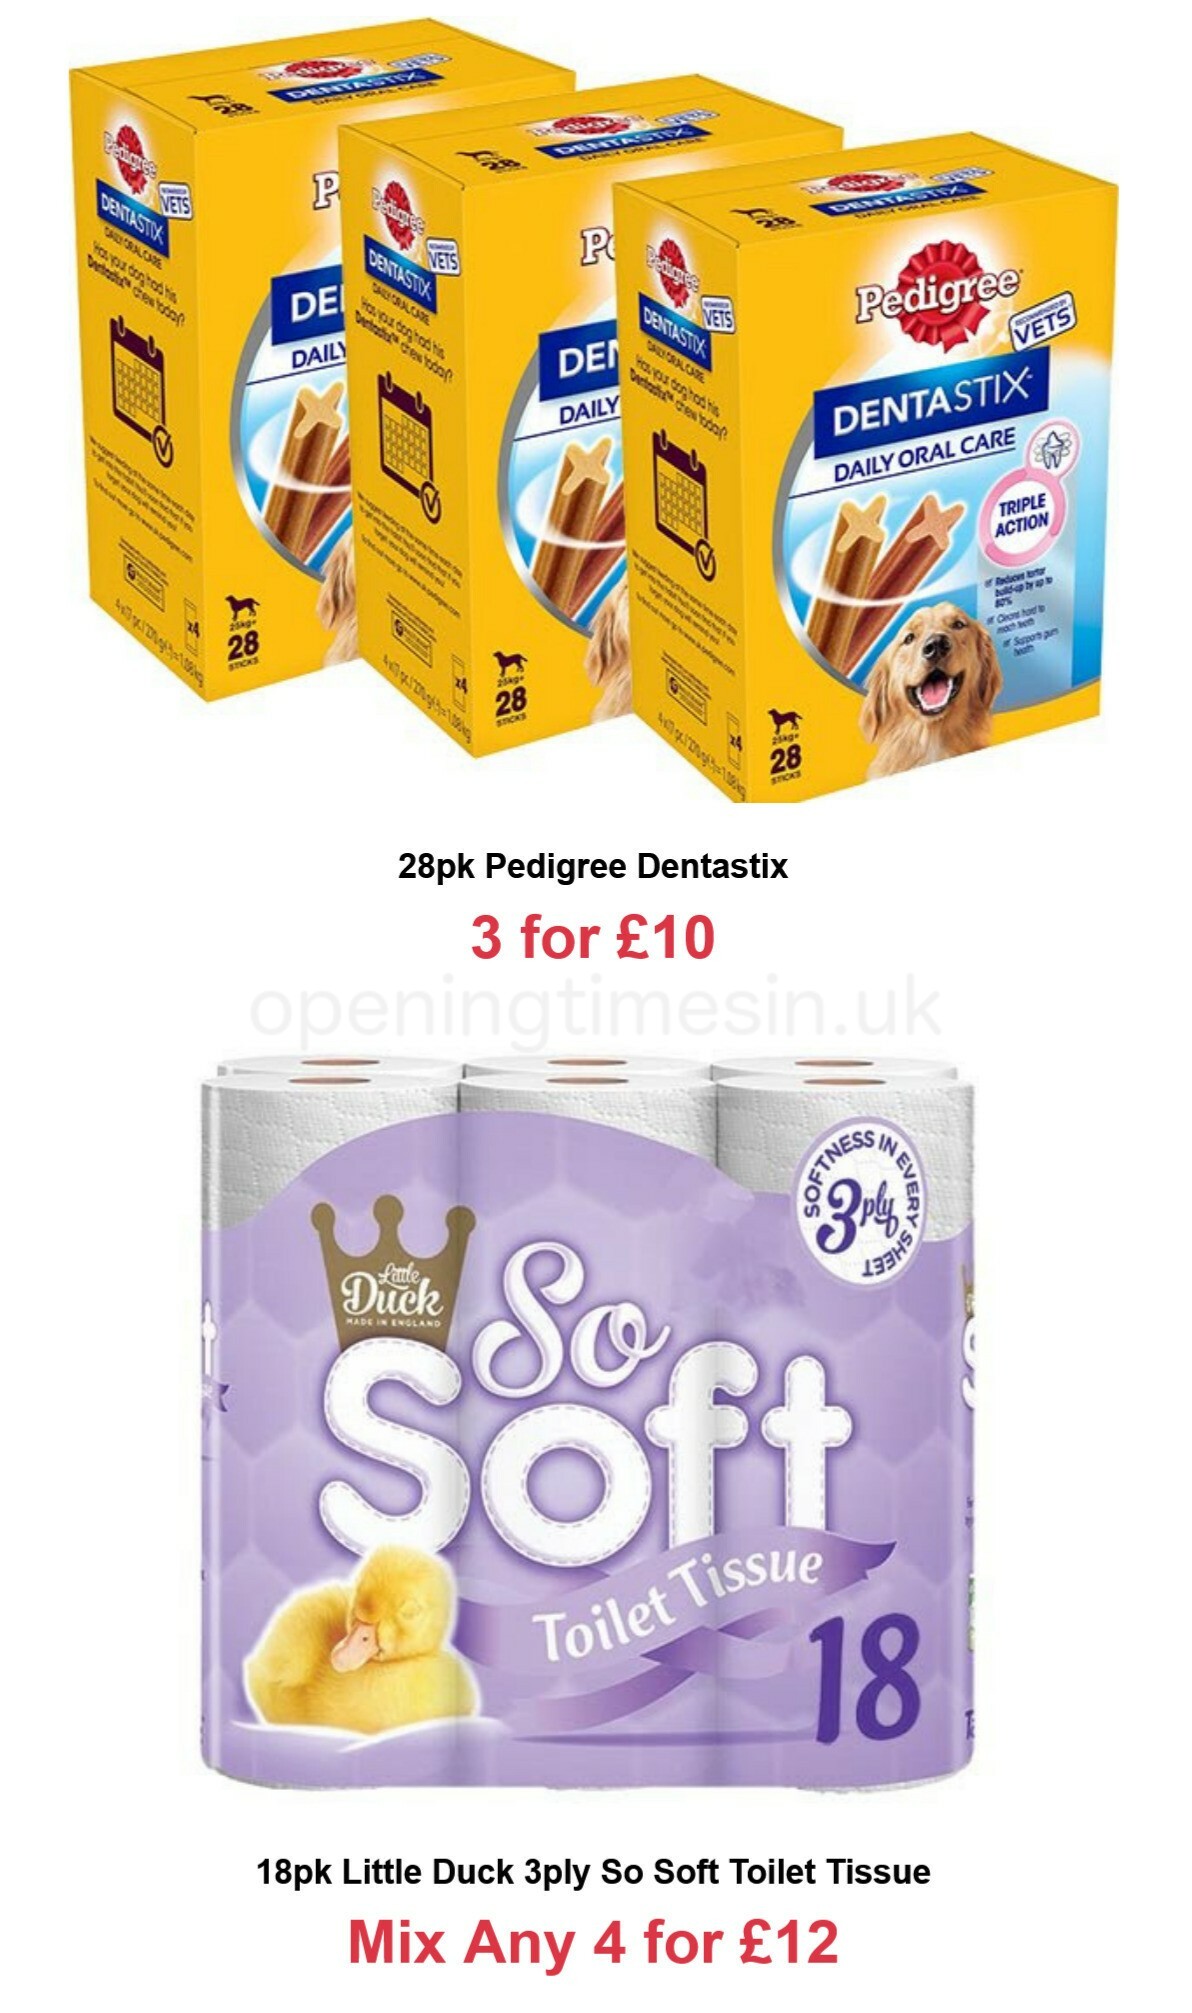 Farmfoods Offers from 30 March